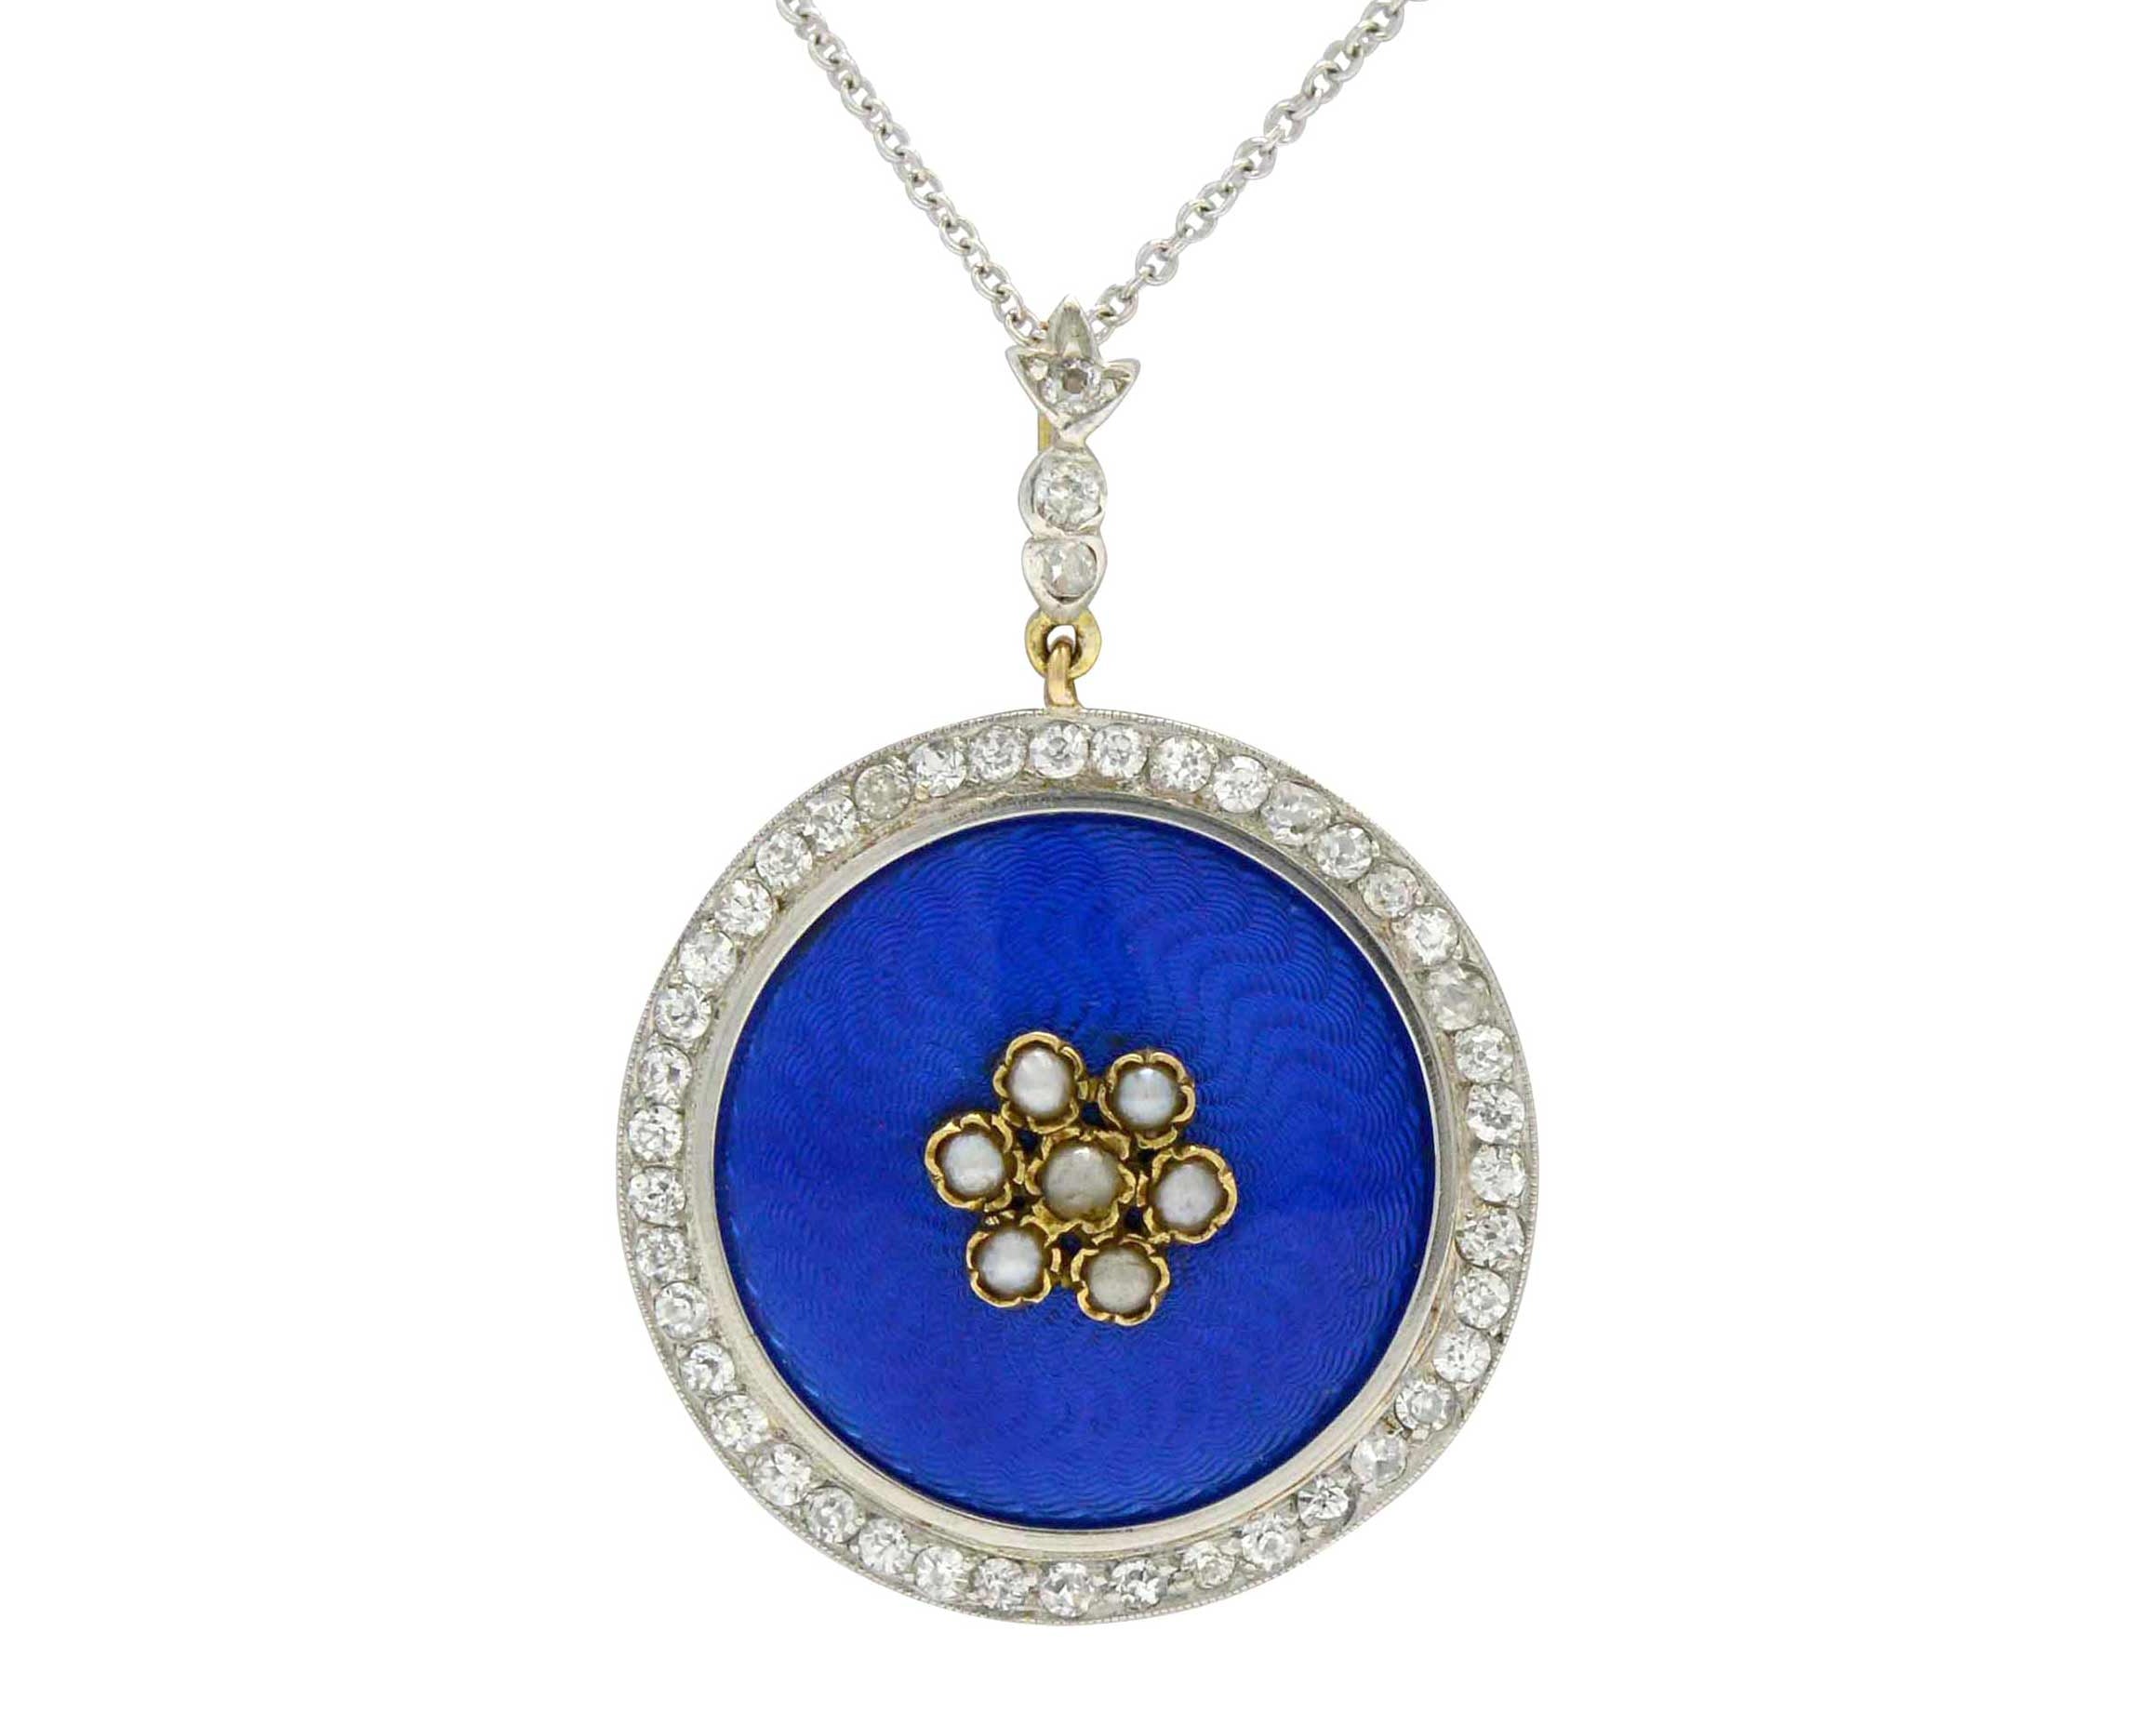 This blue enamel pendant has a motif of dainty seed pearls and blue enamel.